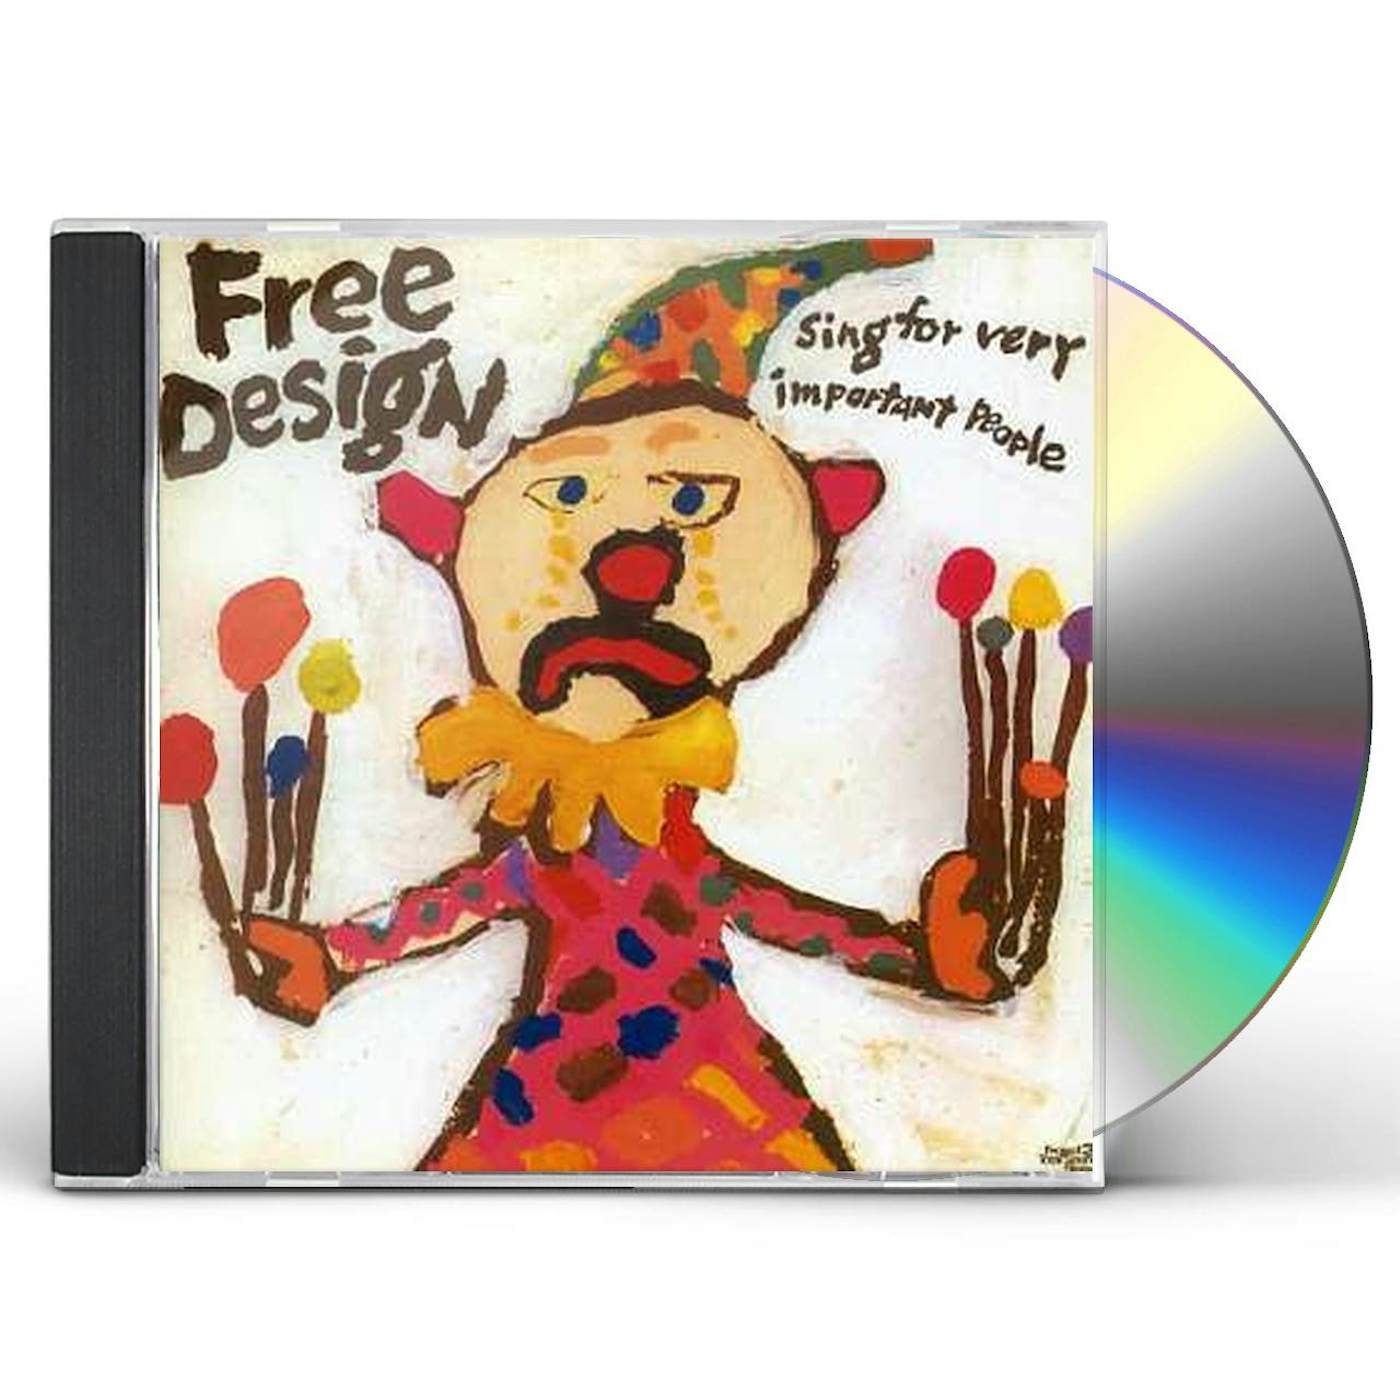 The Free Design SING FOR VERY IMPORTANT PEOPLE CD